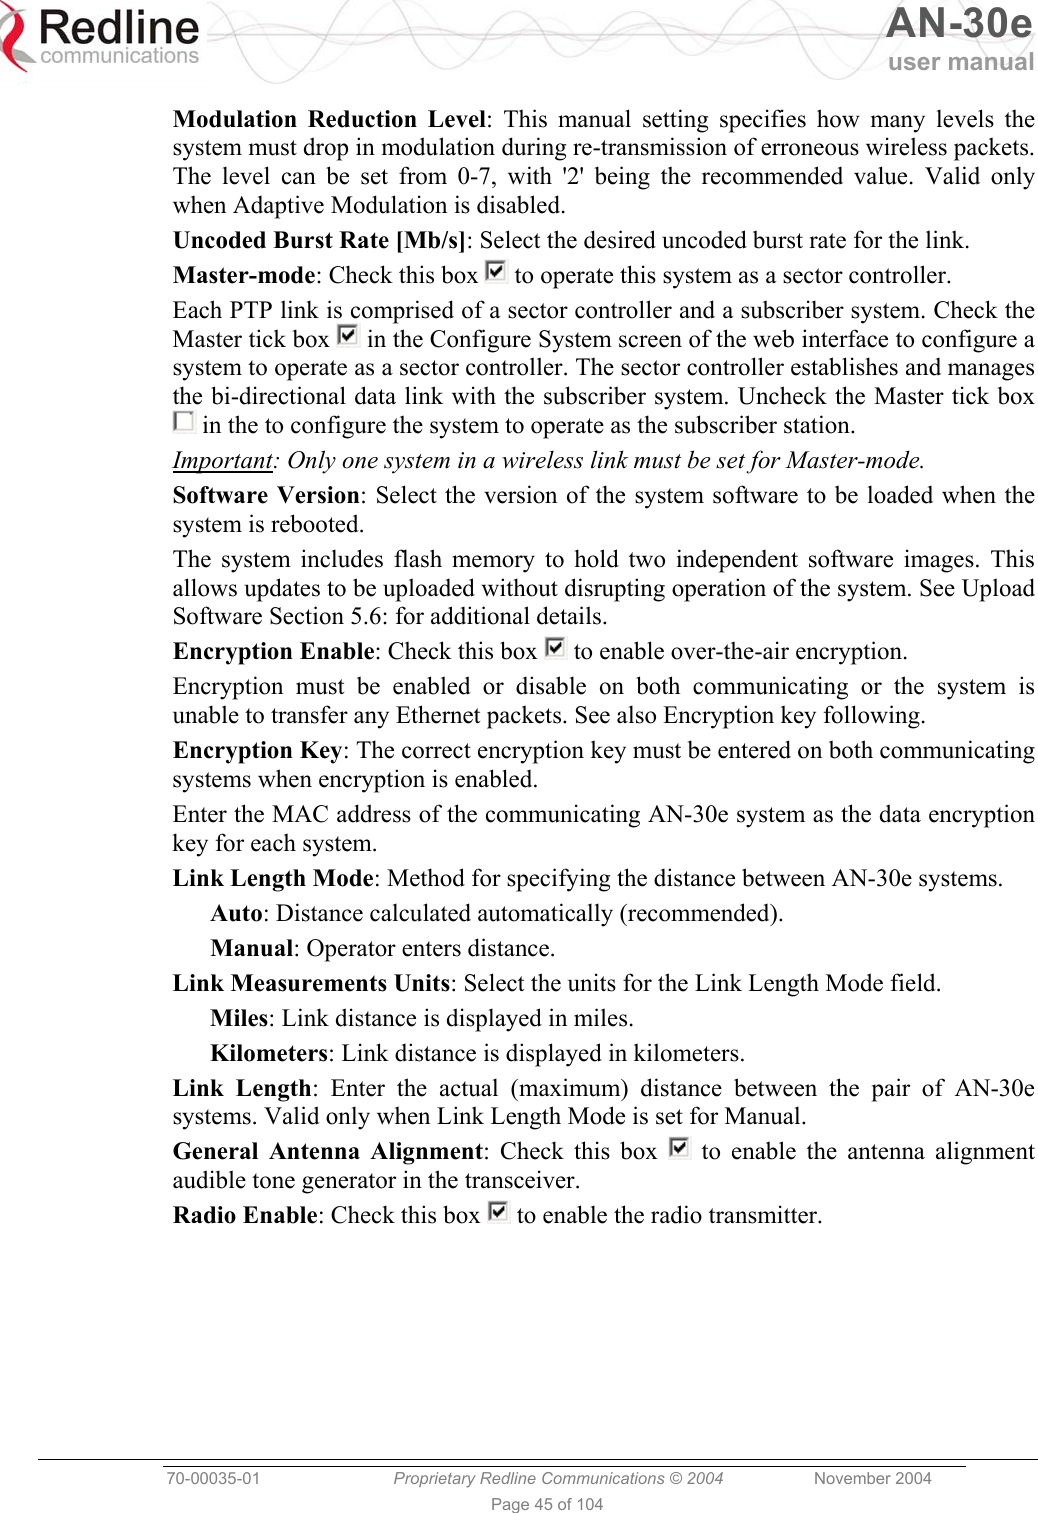   AN-30e user manual  70-00035-01  Proprietary Redline Communications © 2004 November 2004   Page 45 of 104 Modulation Reduction Level: This manual setting specifies how many levels the system must drop in modulation during re-transmission of erroneous wireless packets. The level can be set from 0-7, with &apos;2&apos; being the recommended value. Valid only when Adaptive Modulation is disabled. Uncoded Burst Rate [Mb/s]: Select the desired uncoded burst rate for the link. Master-mode: Check this box   to operate this system as a sector controller. Each PTP link is comprised of a sector controller and a subscriber system. Check the Master tick box   in the Configure System screen of the web interface to configure a system to operate as a sector controller. The sector controller establishes and manages the bi-directional data link with the subscriber system. Uncheck the Master tick box  in the to configure the system to operate as the subscriber station. Important: Only one system in a wireless link must be set for Master-mode. Software Version: Select the version of the system software to be loaded when the system is rebooted. The system includes flash memory to hold two independent software images. This allows updates to be uploaded without disrupting operation of the system. See Upload Software Section 5.6: for additional details. Encryption Enable: Check this box   to enable over-the-air encryption. Encryption must be enabled or disable on both communicating or the system is unable to transfer any Ethernet packets. See also Encryption key following. Encryption Key: The correct encryption key must be entered on both communicating systems when encryption is enabled. Enter the MAC address of the communicating AN-30e system as the data encryption key for each system. Link Length Mode: Method for specifying the distance between AN-30e systems. Auto: Distance calculated automatically (recommended). Manual: Operator enters distance. Link Measurements Units: Select the units for the Link Length Mode field. Miles: Link distance is displayed in miles. Kilometers: Link distance is displayed in kilometers. Link Length: Enter the actual (maximum) distance between the pair of AN-30e systems. Valid only when Link Length Mode is set for Manual. General Antenna Alignment: Check this box   to enable the antenna alignment audible tone generator in the transceiver. Radio Enable: Check this box   to enable the radio transmitter. 